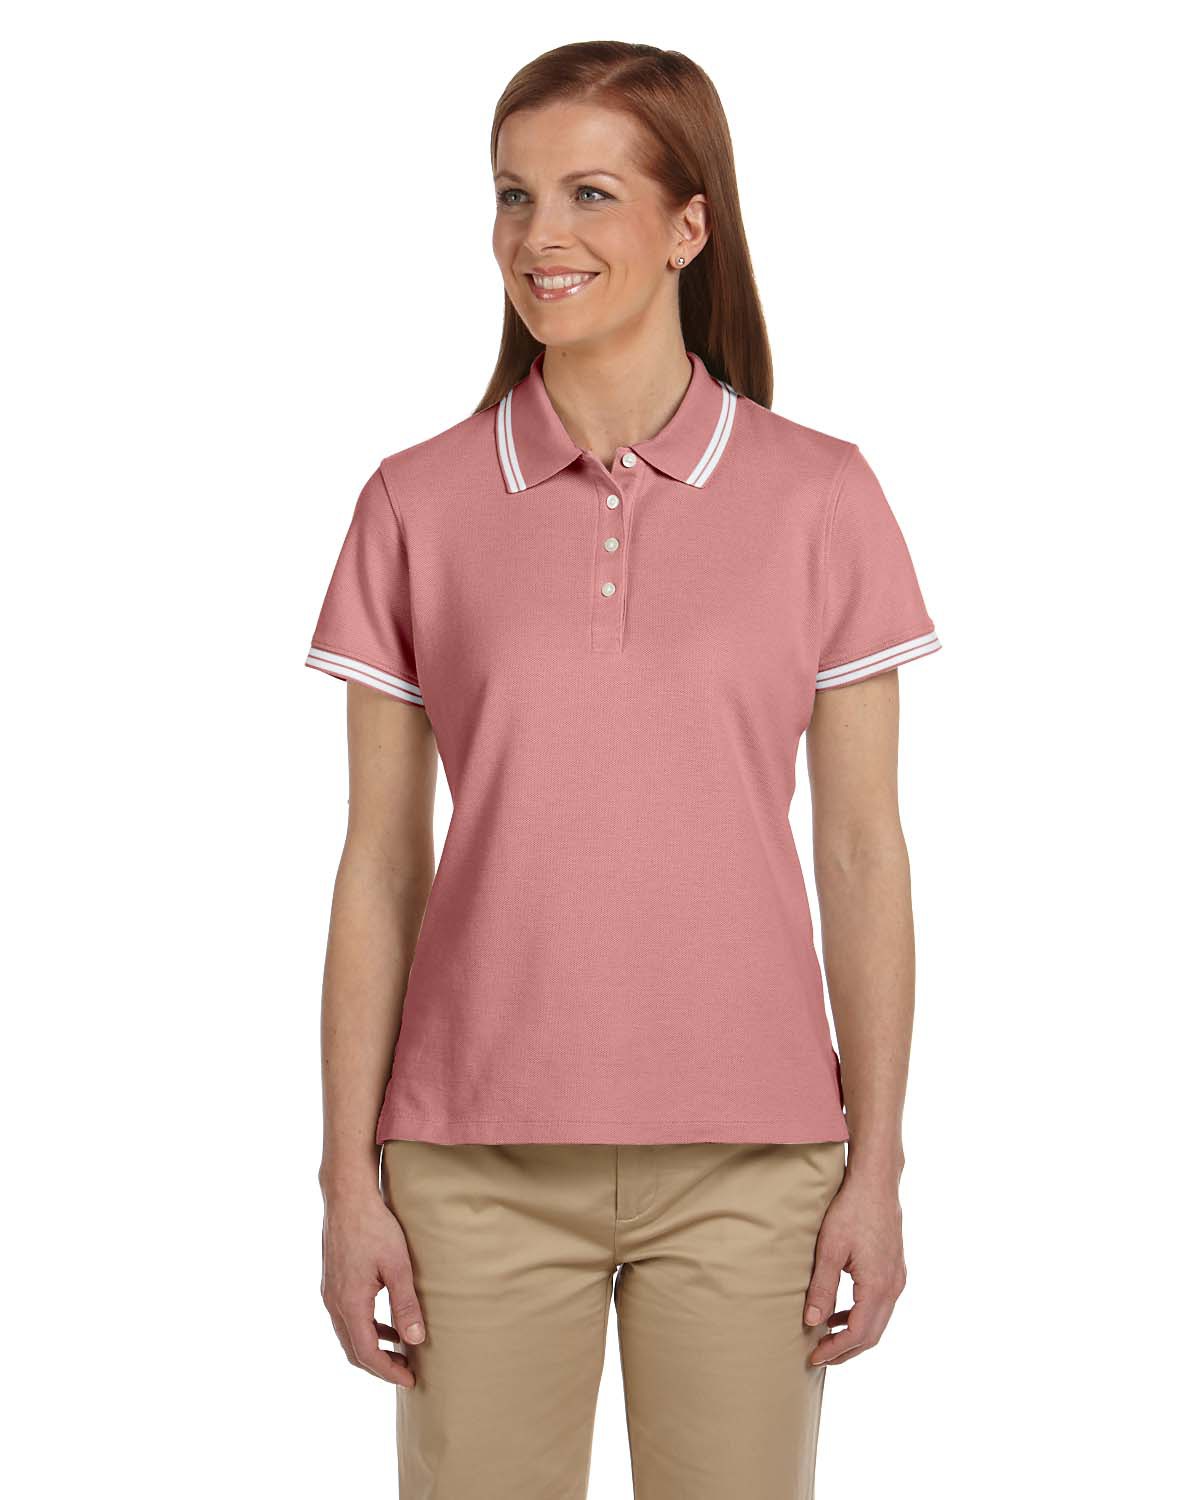 Chestnut Hill CH113W  Women's Tipped Performance Plus Pique Polo